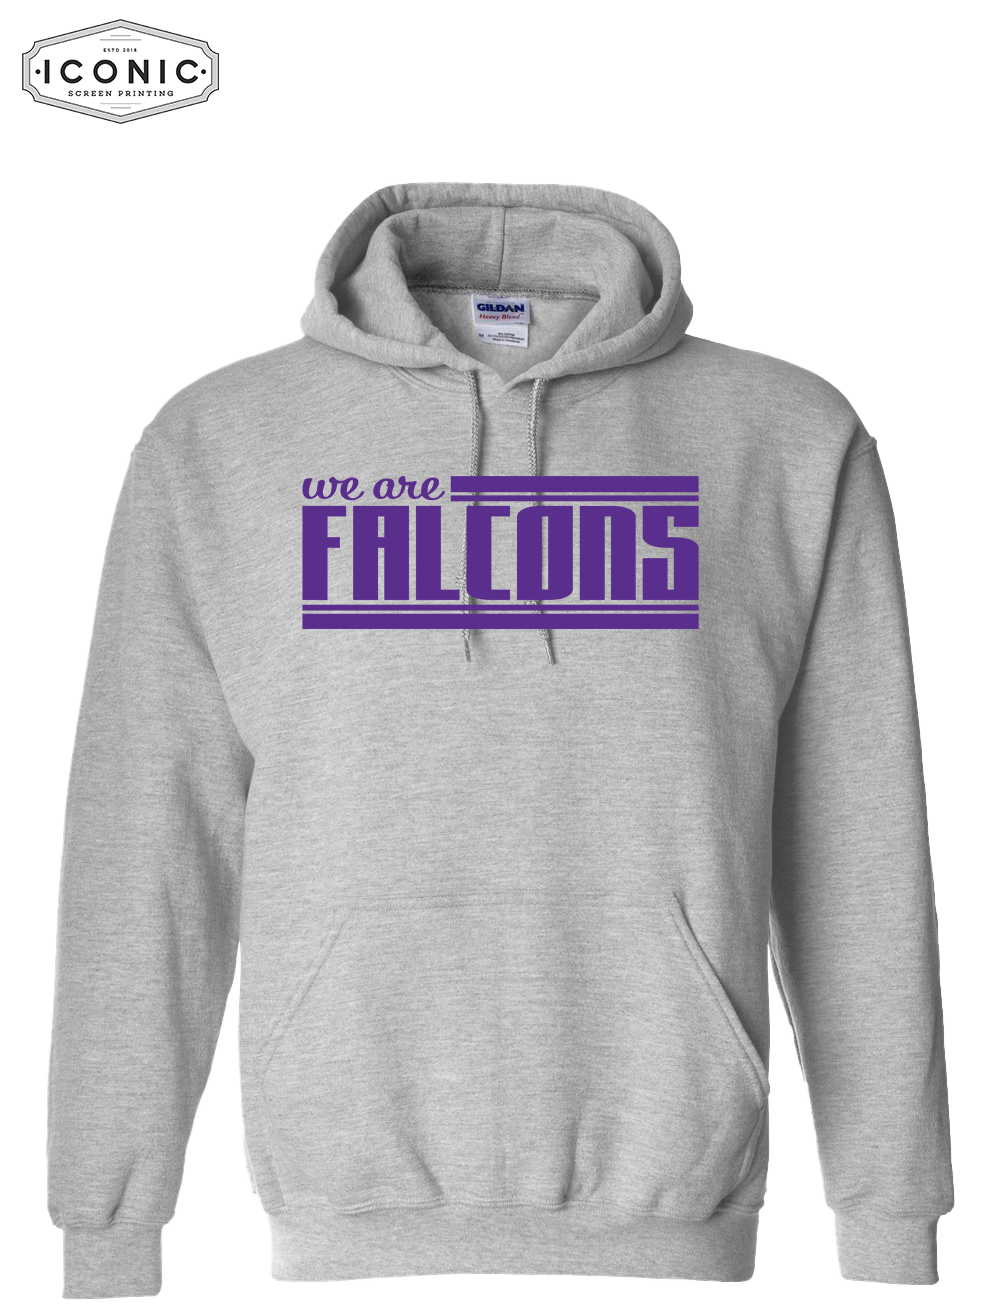 We Are Falcons - Heavy Blend Hooded Sweatshirt